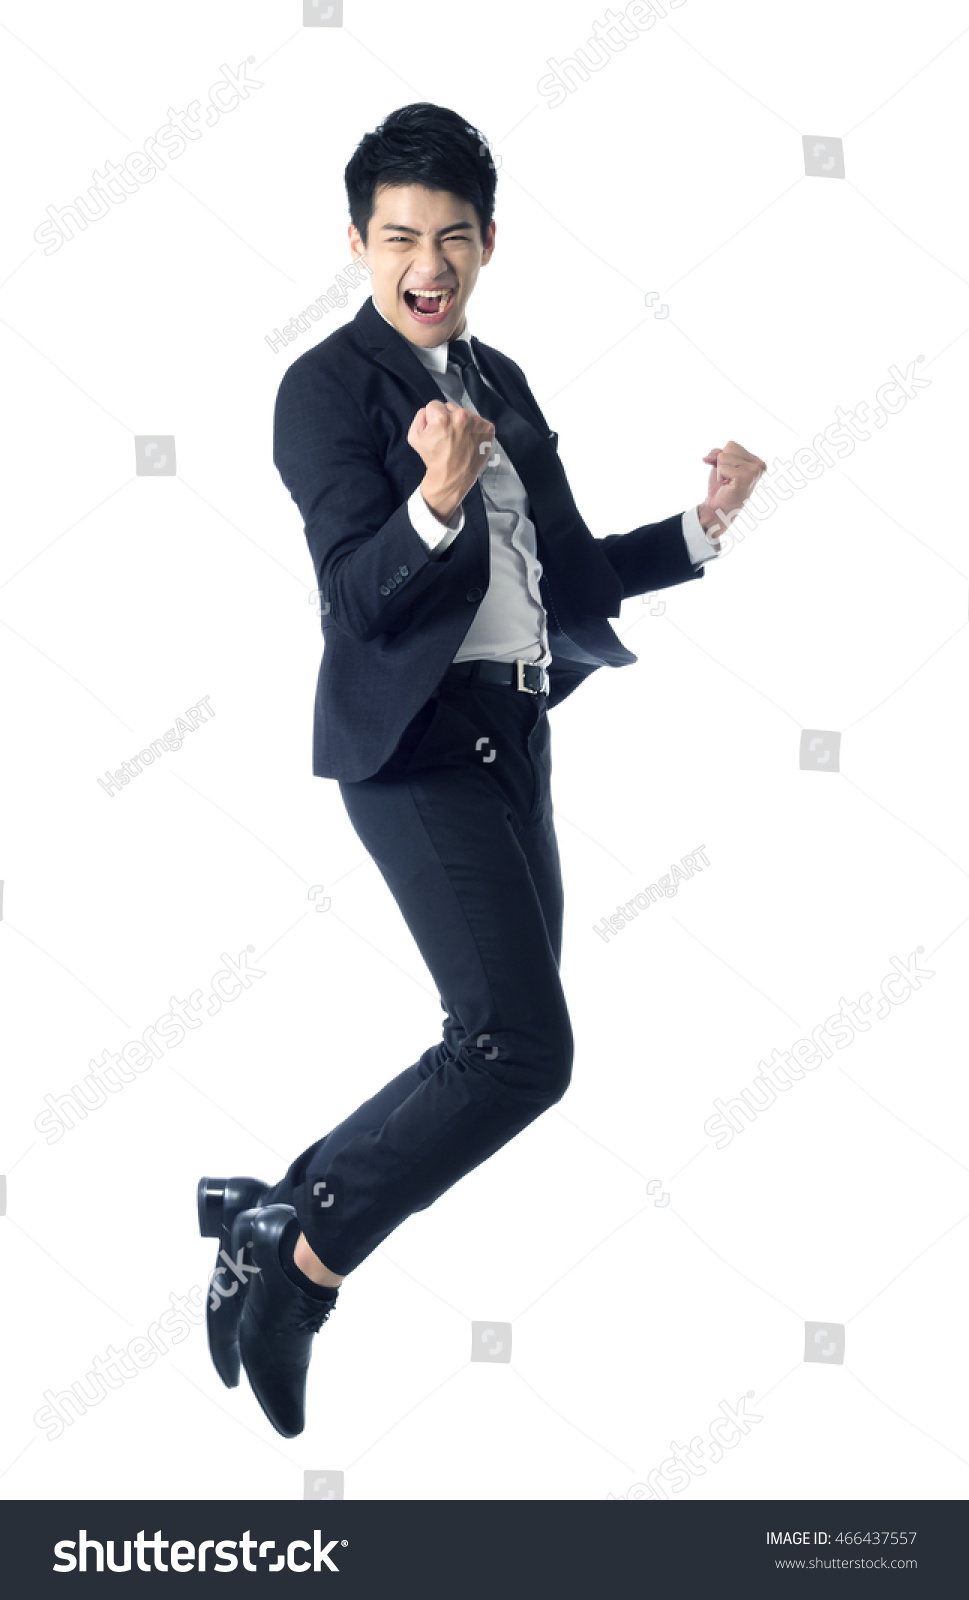 Portrait of young businessman jumping in the air and celebrating his success #466437557